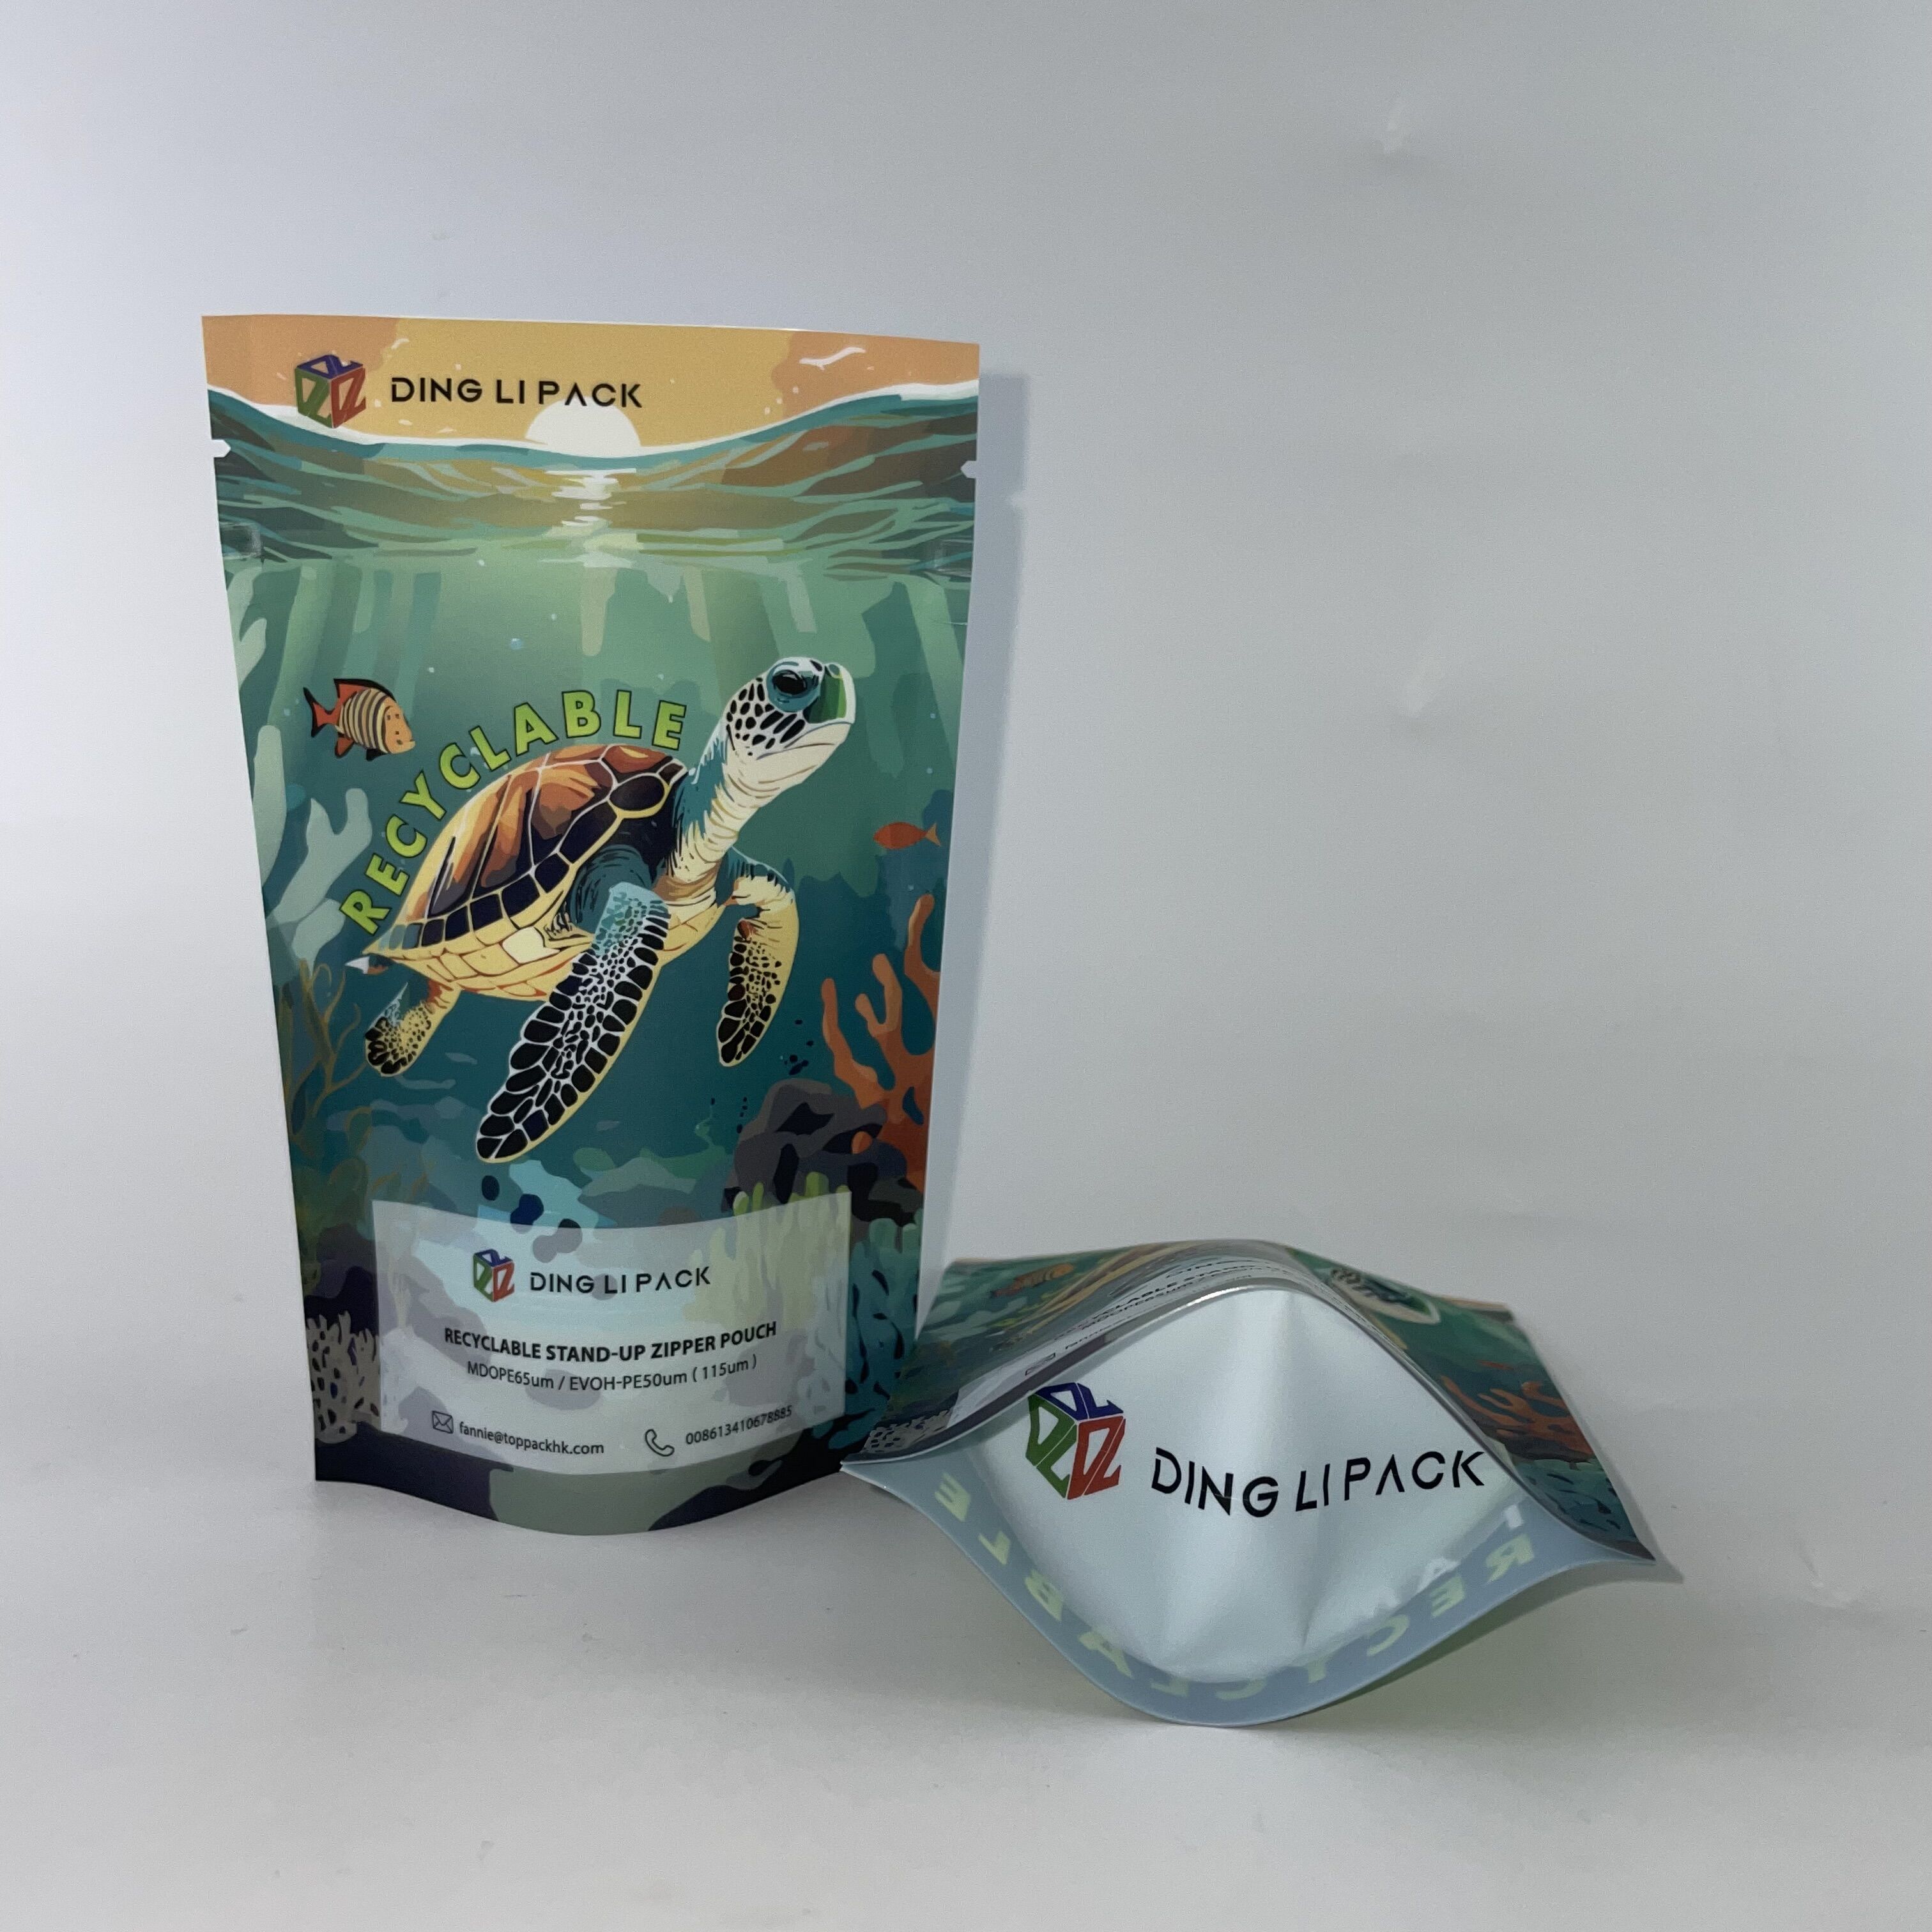 https://www.toppackcn.com/recyclable-stand-up-zipper-pouches-product/